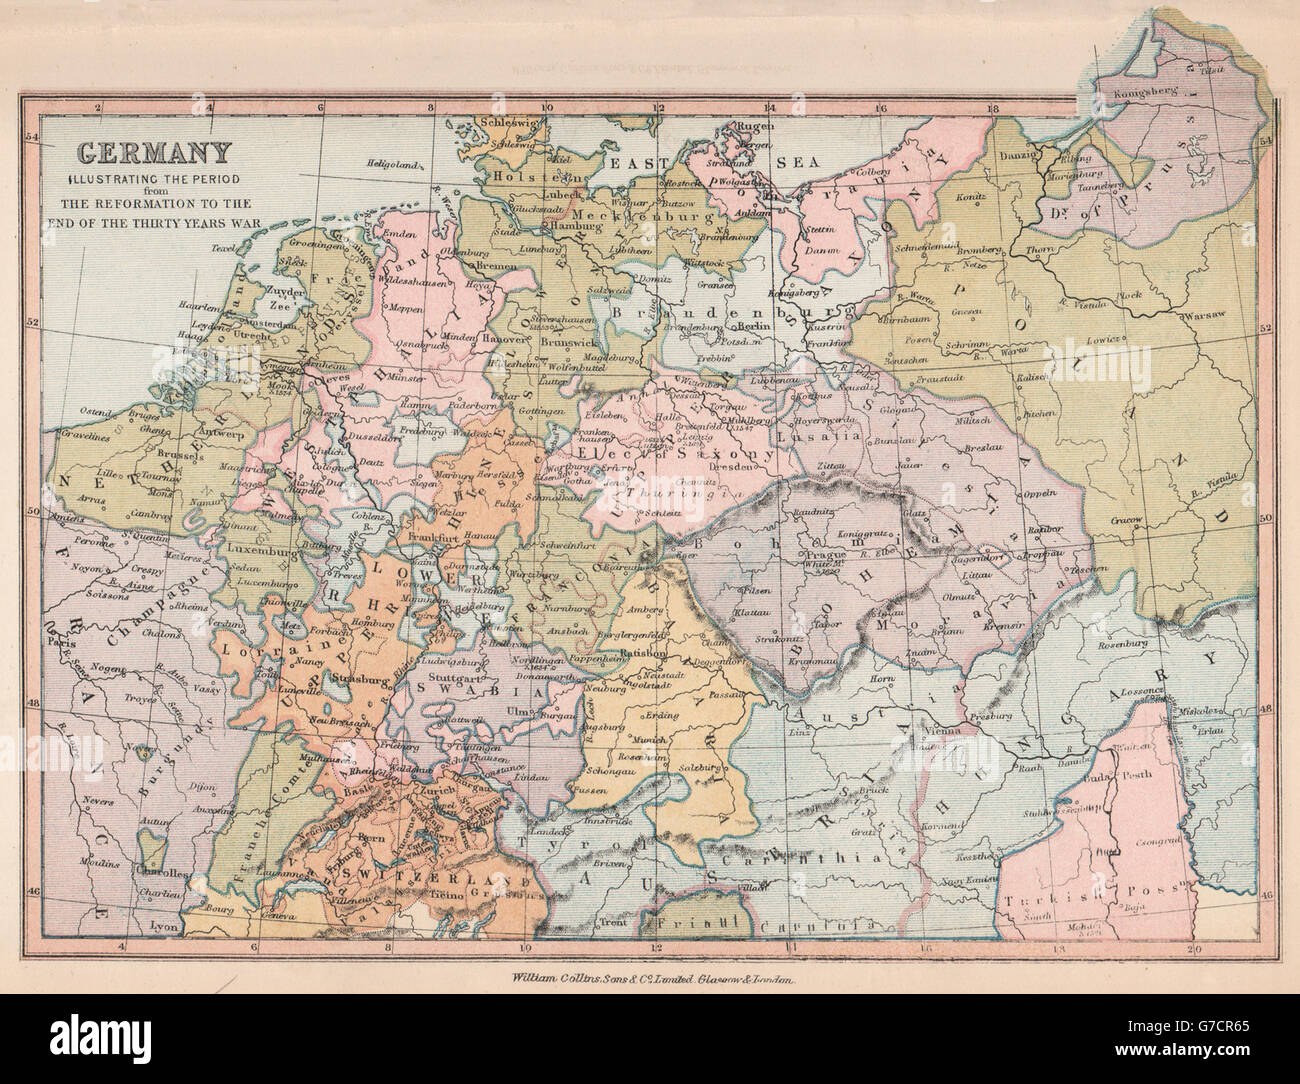 GERMANY. 'From the Reformation to the end of the thirty years war', 1878 map Stock Photo